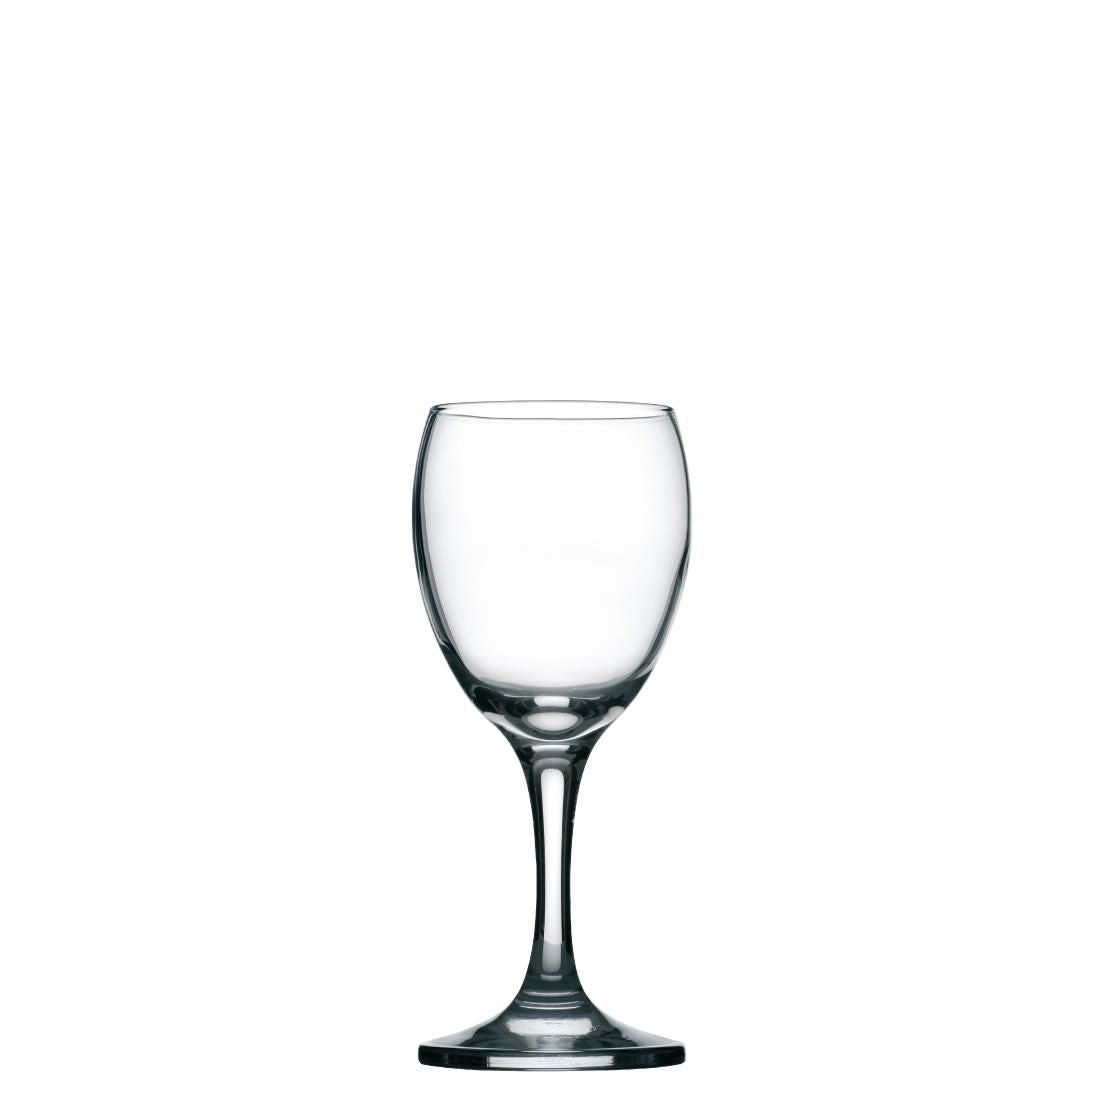 T275 Utopia Imperial White Wine Glasses 200ml CE Marked at 125ml (Pack of 12)